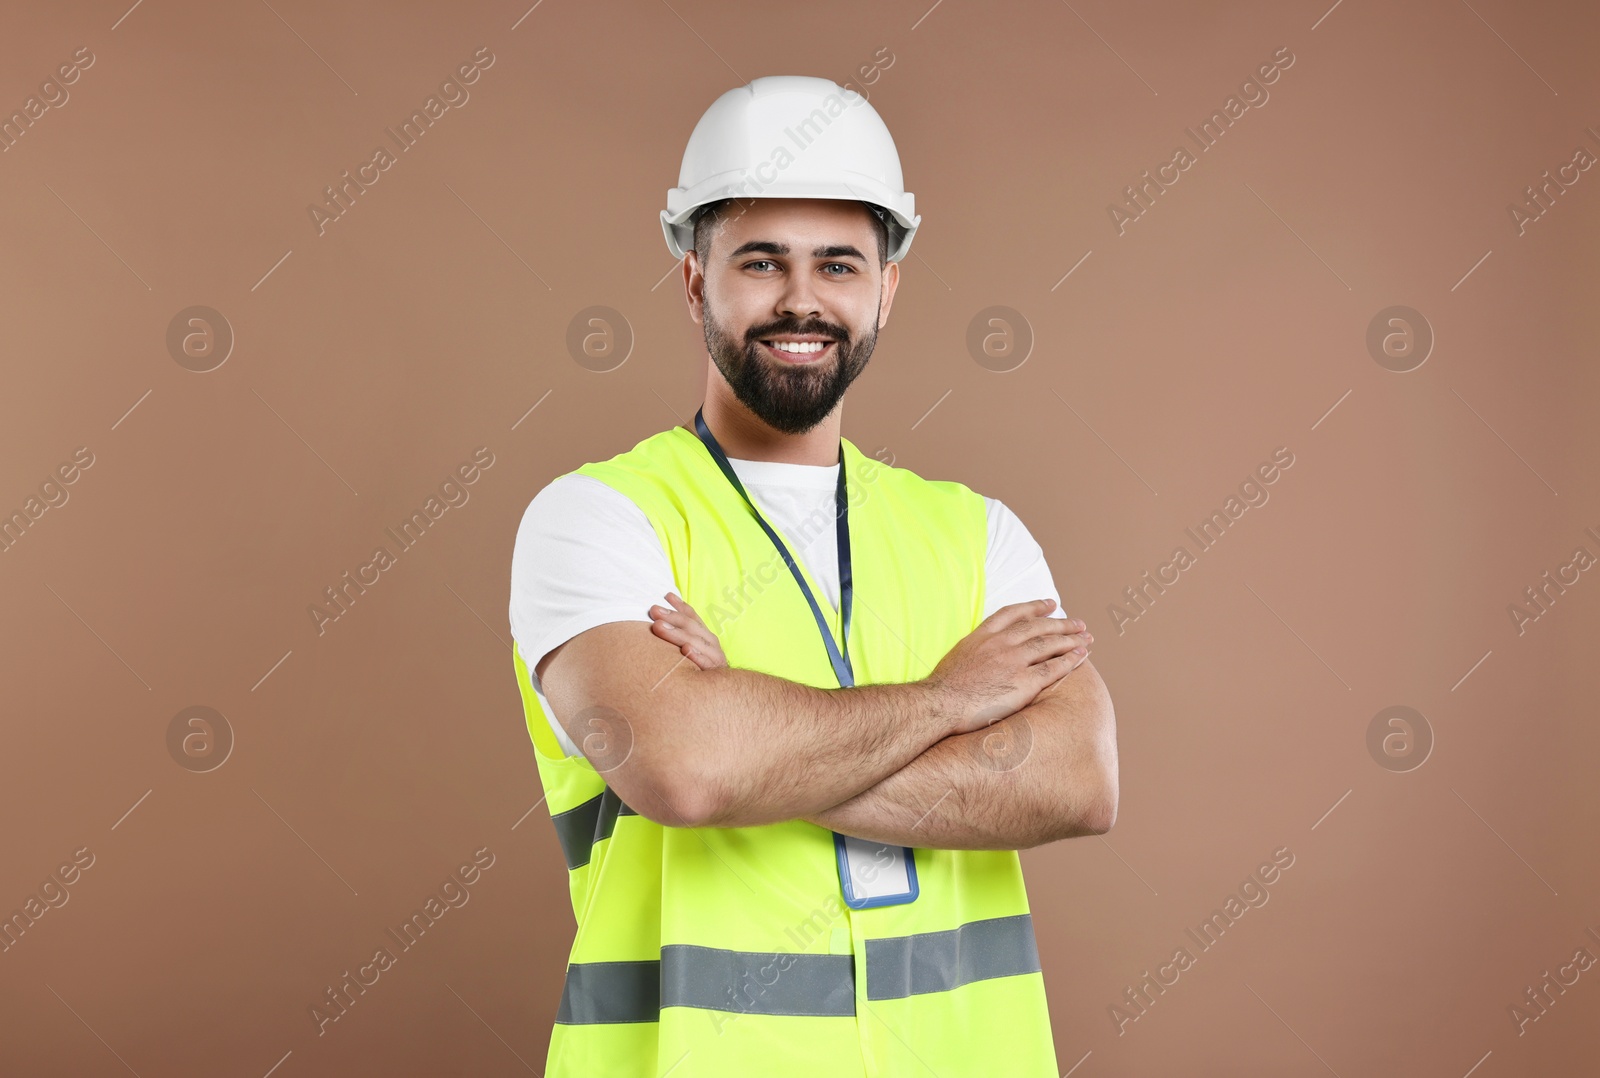 Photo of Engineer with hard hat and badge on brown background